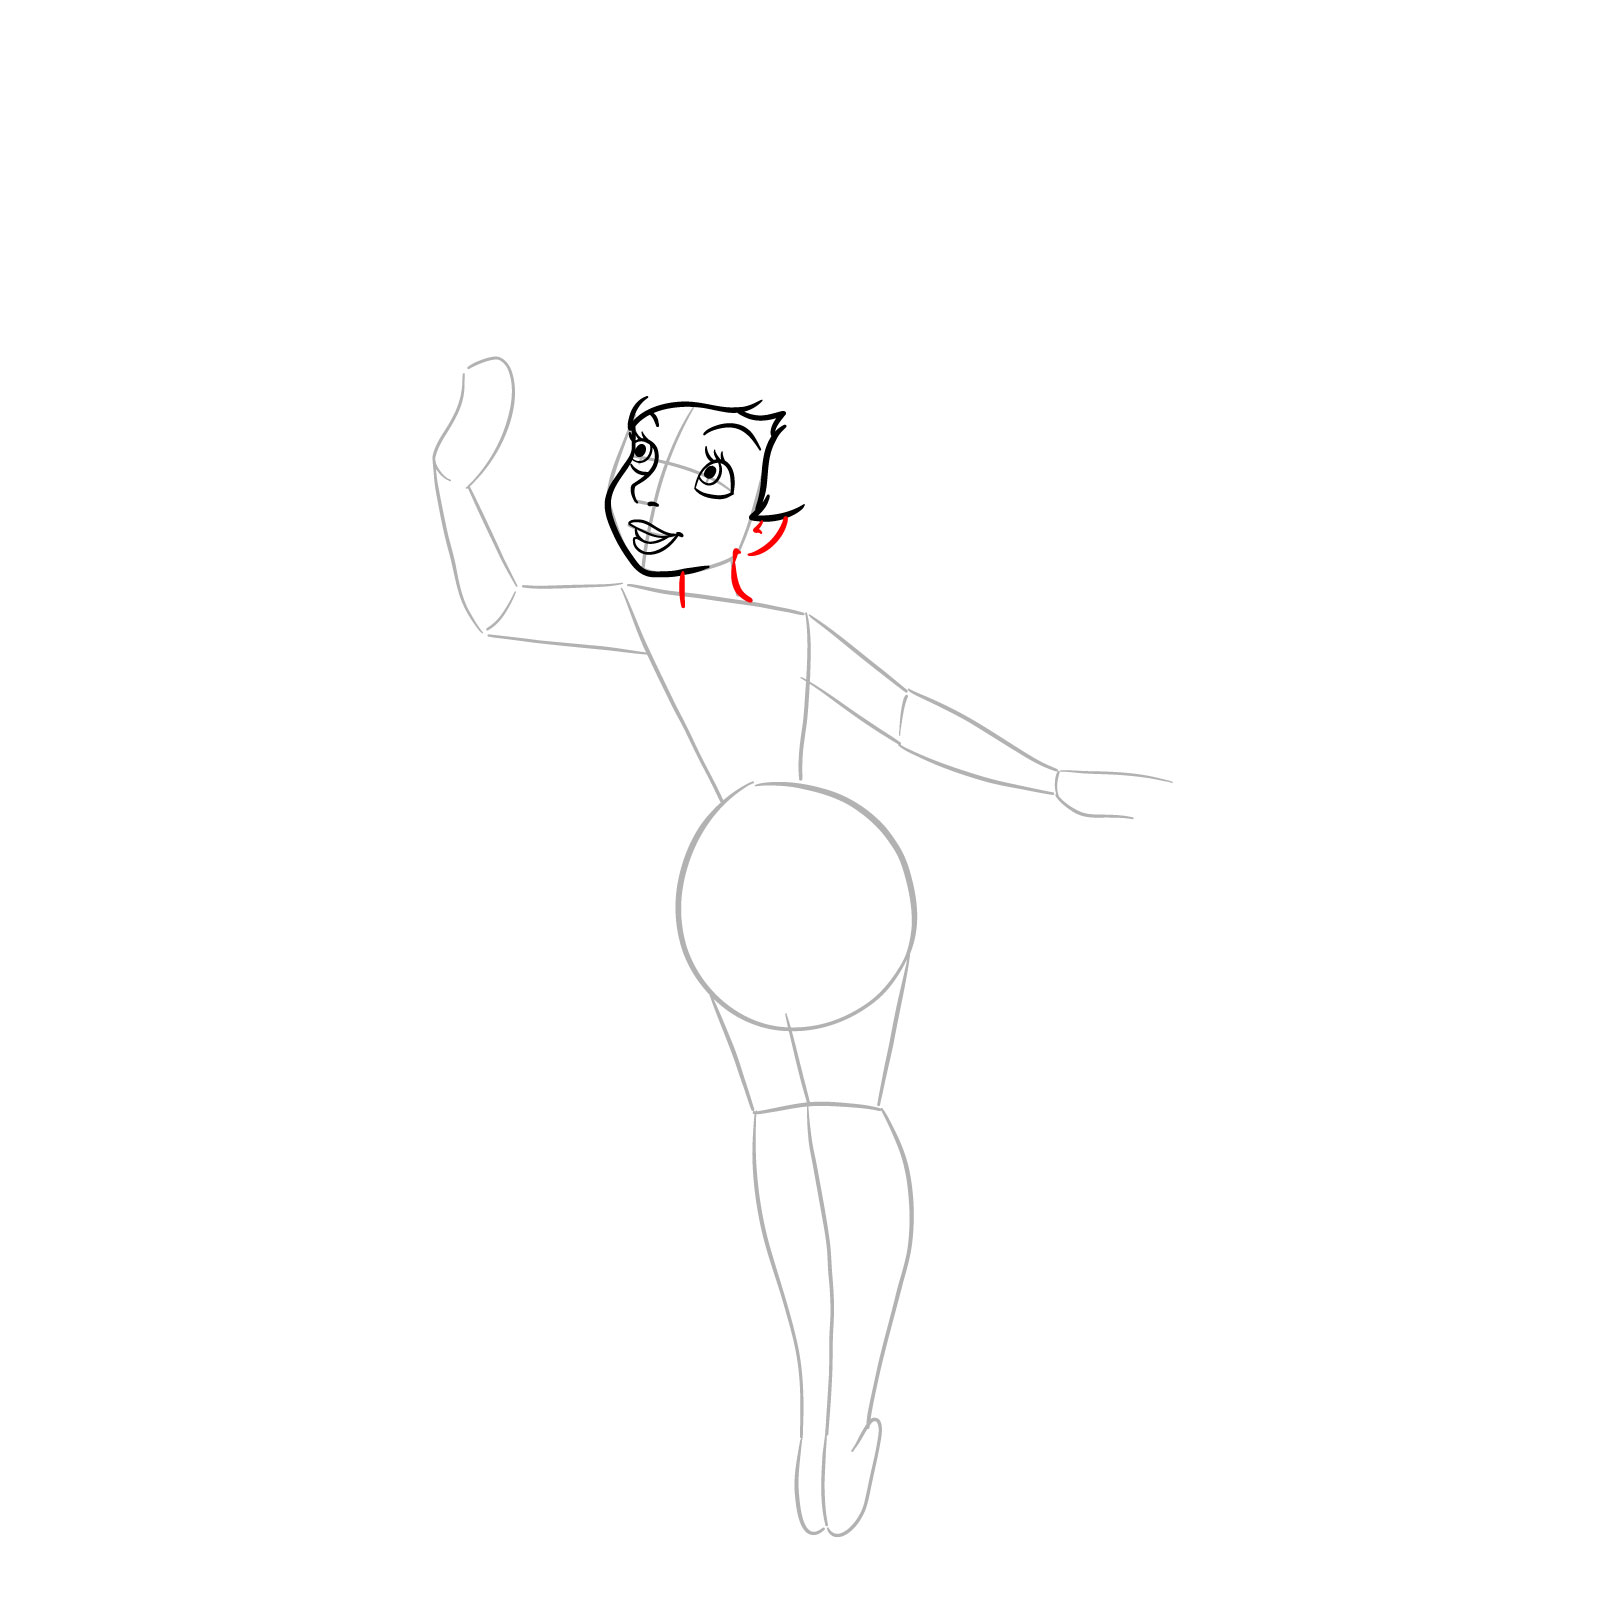 How to draw Tinker Bell in a Christmas costume - step 10